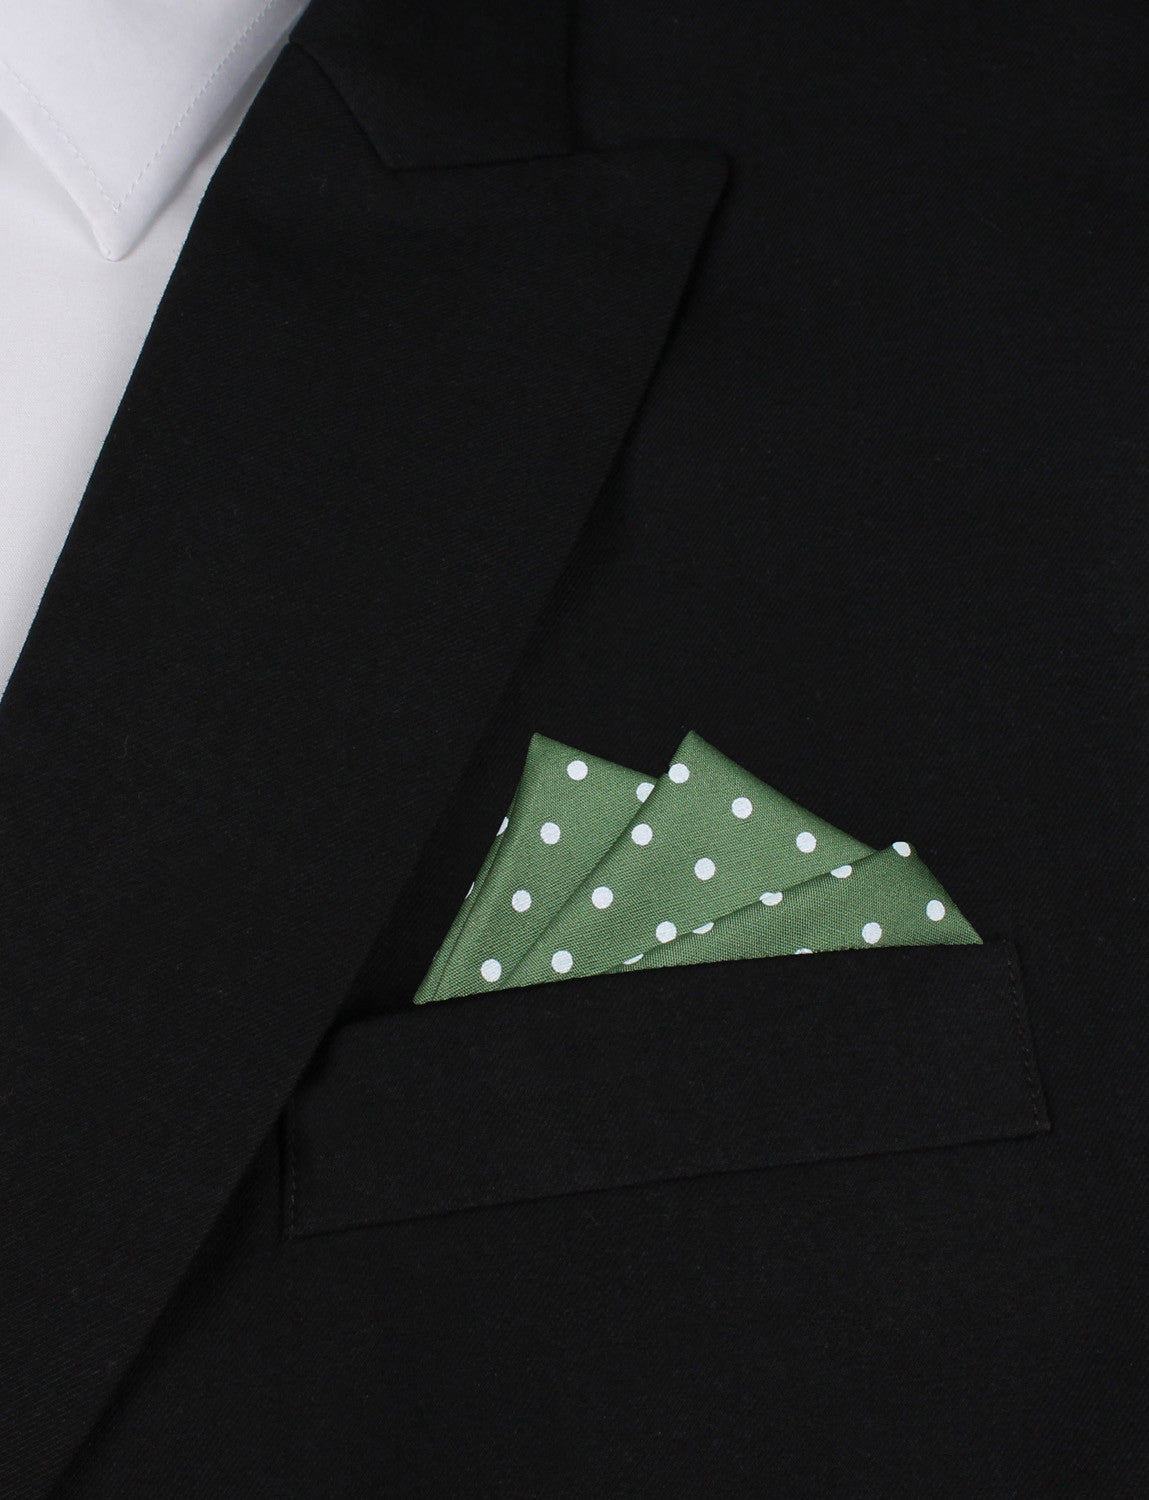 Olive Green Cotton with Mini White Polka Dots Oxygen Three Point Pocket Square Fold